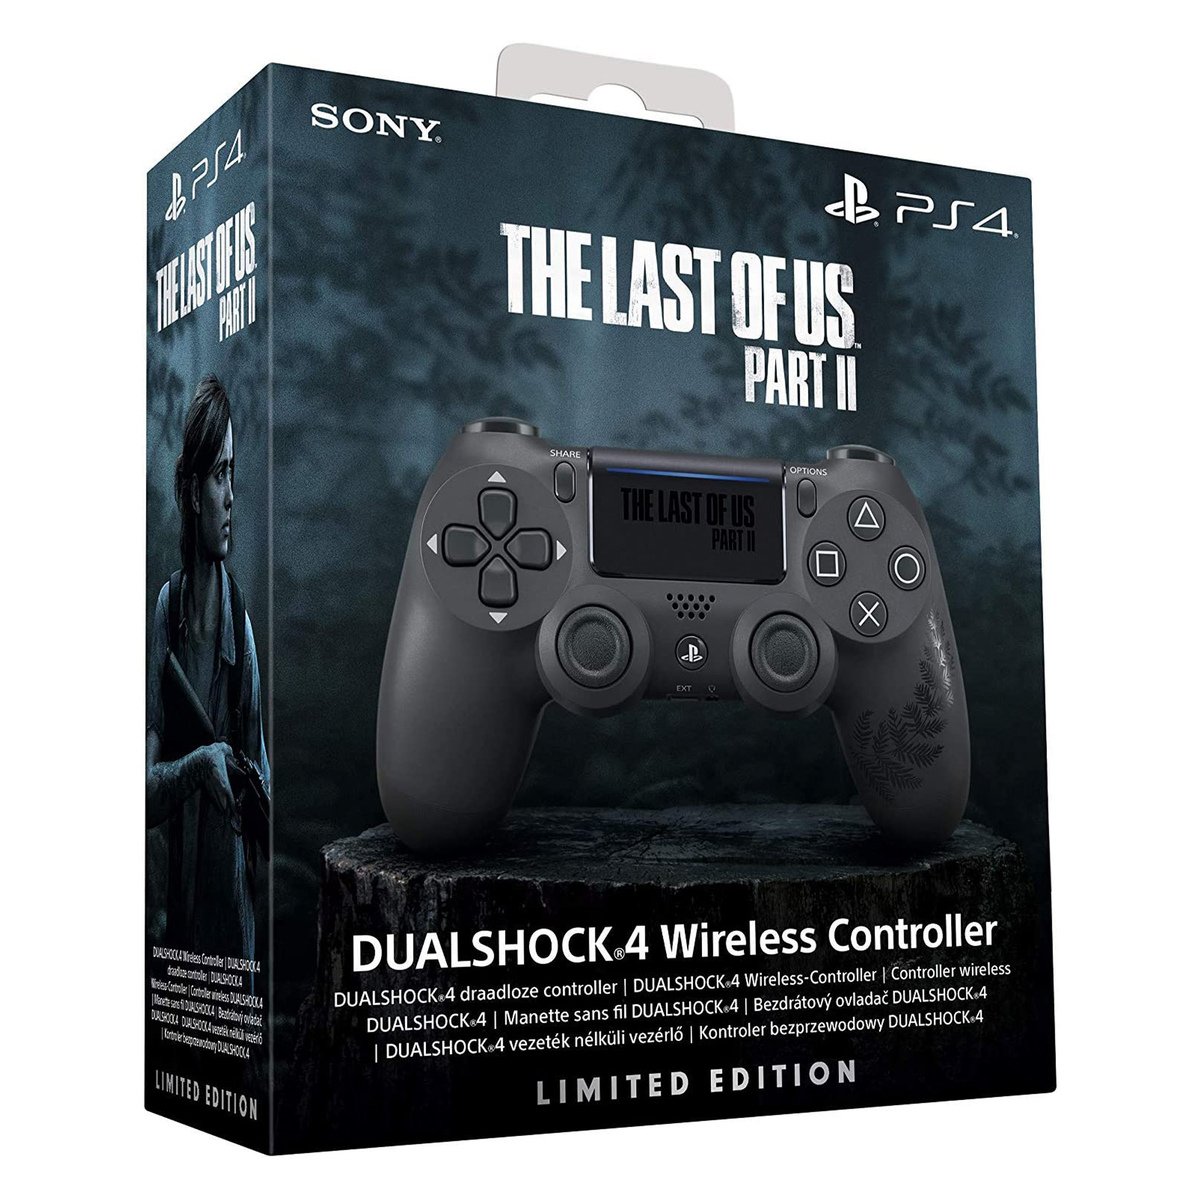 Sony Limited Edition The Last of Us Part II DualShock 4 Wireless Controller (PS4)